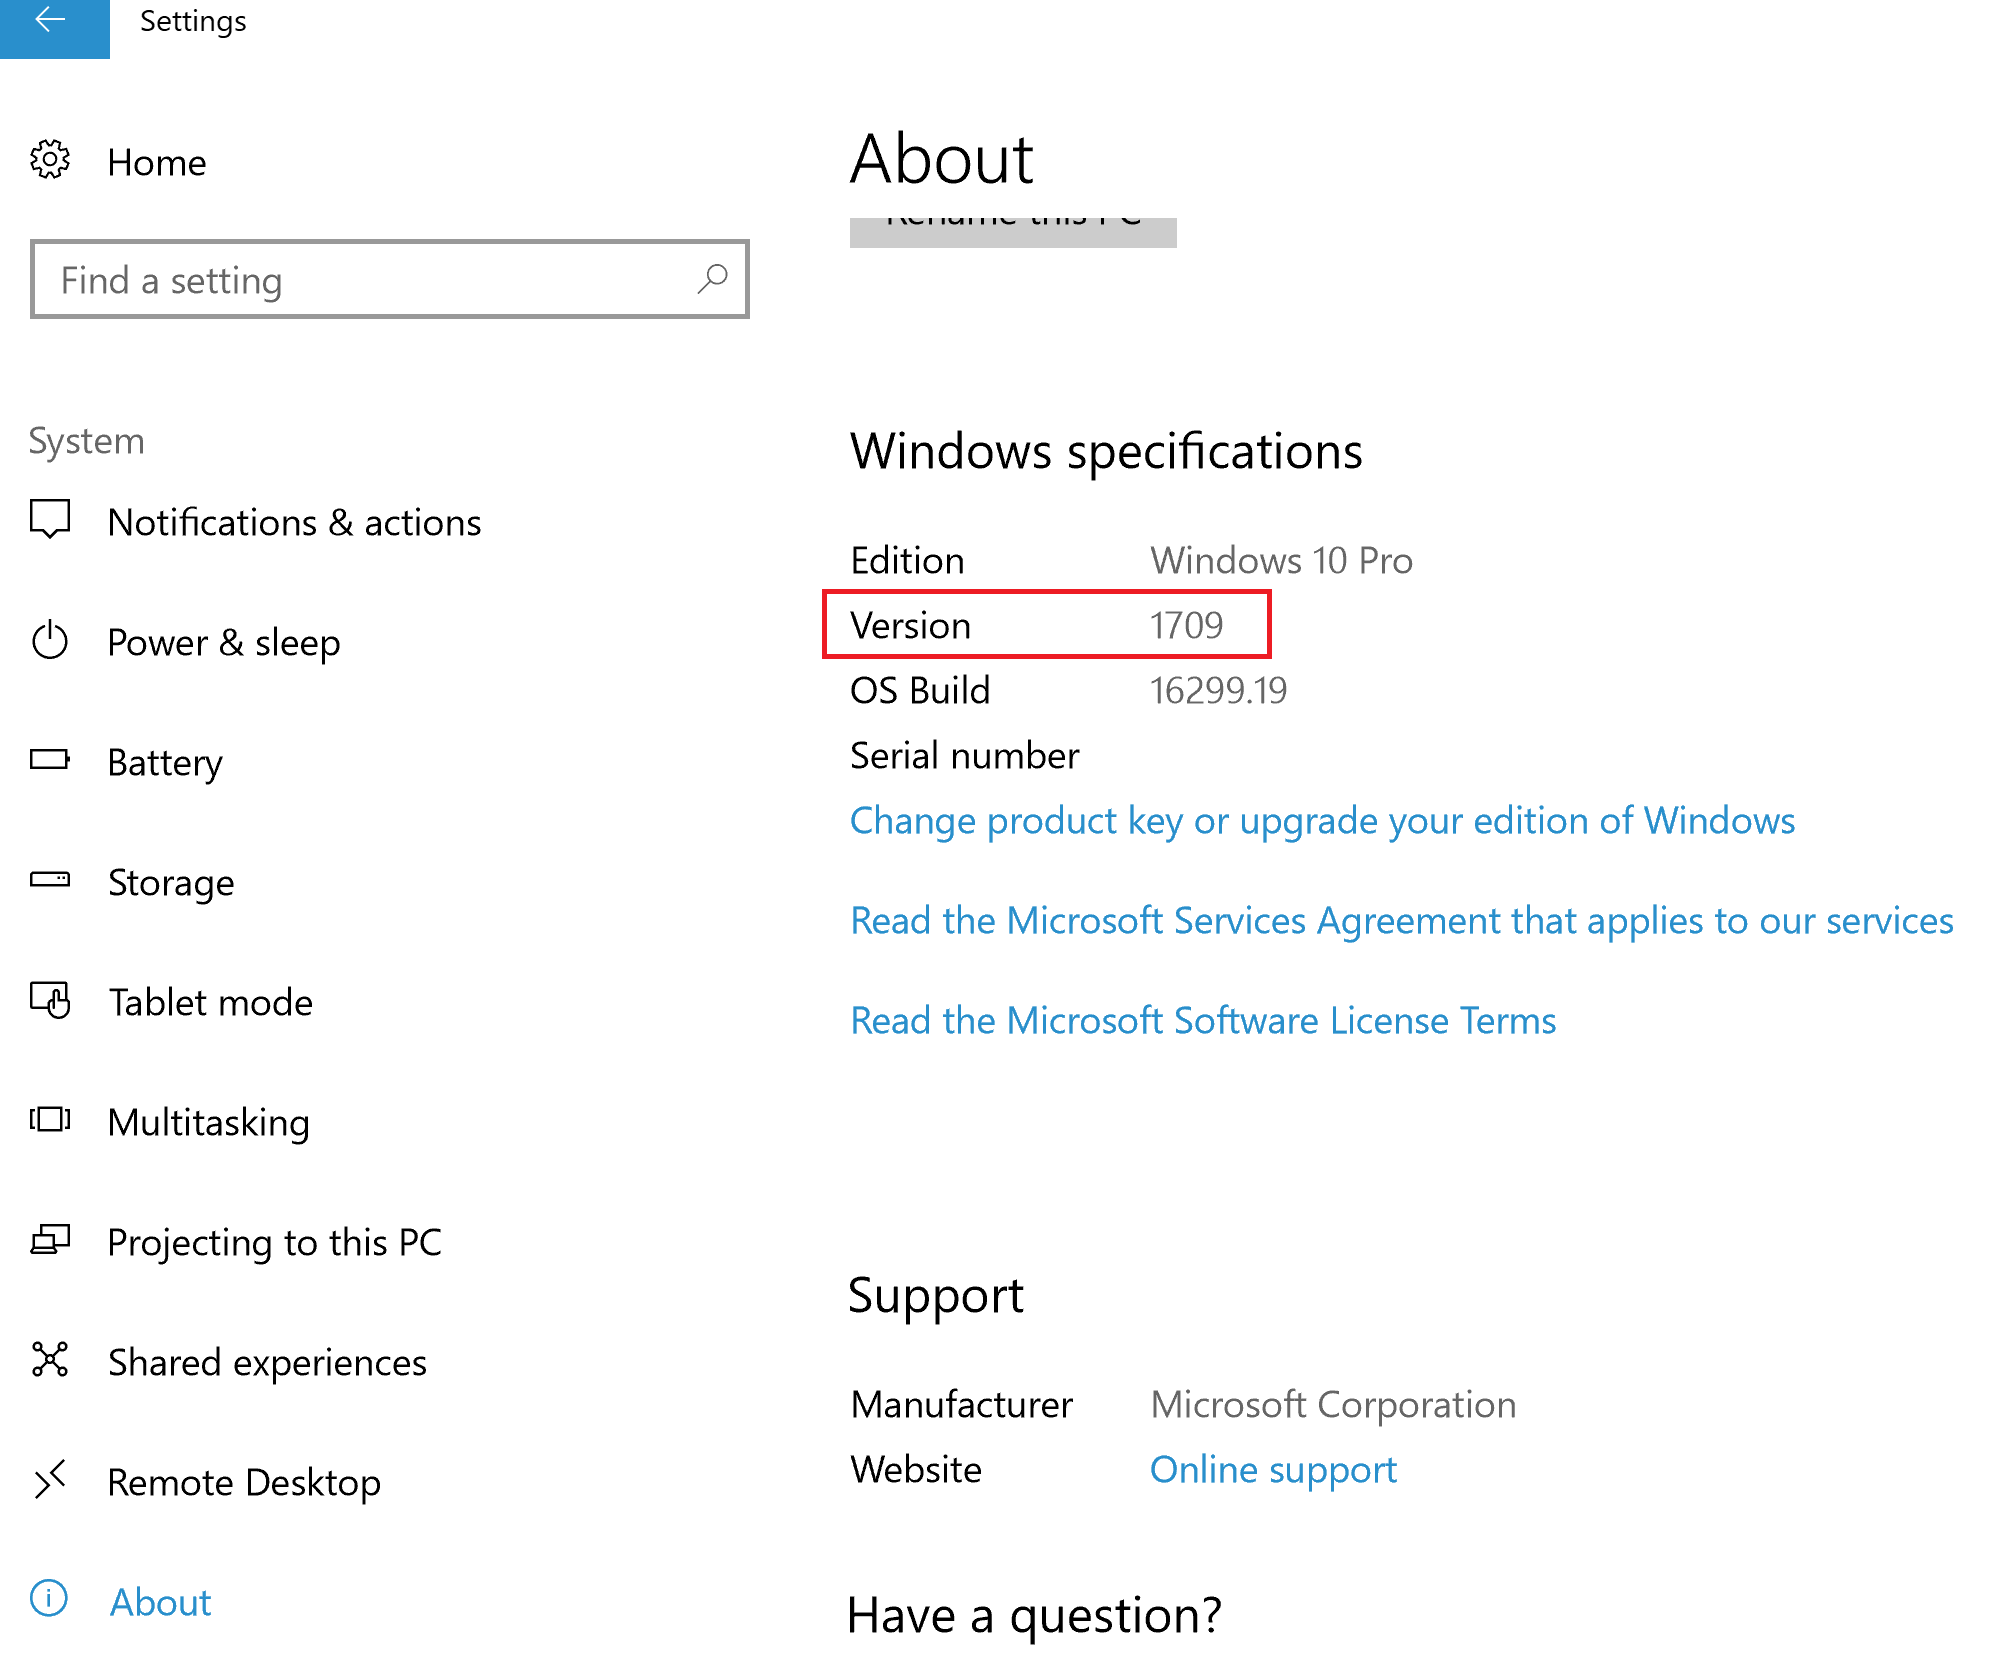 How to find out currently installed Windows Version (Fall Creators